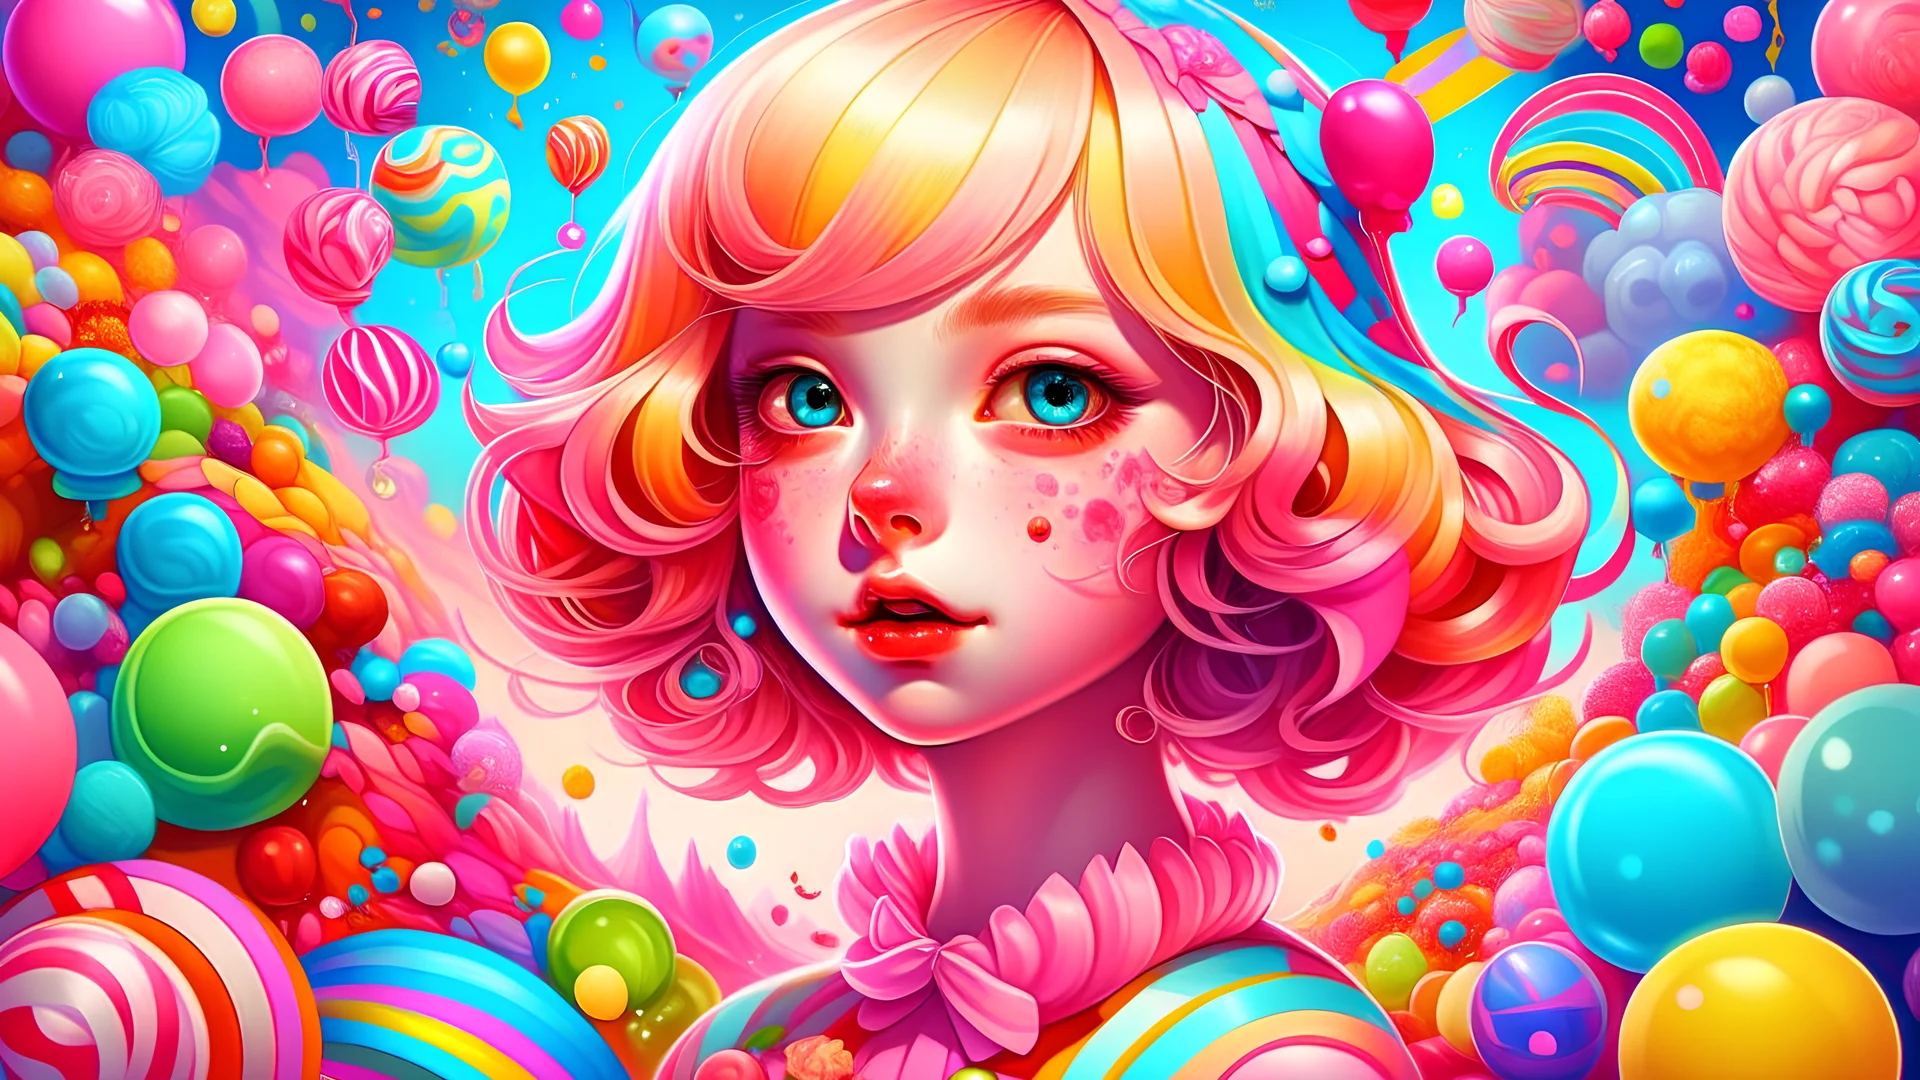 A beautiful white and candy fairy girl portrait, psychedelic colors, whimsical candy land filled with oversized sweets, colorful candy landscapes, and playful characters, in the style of children's book illustrations, bold colors, imaginative scenery, 8K resolution